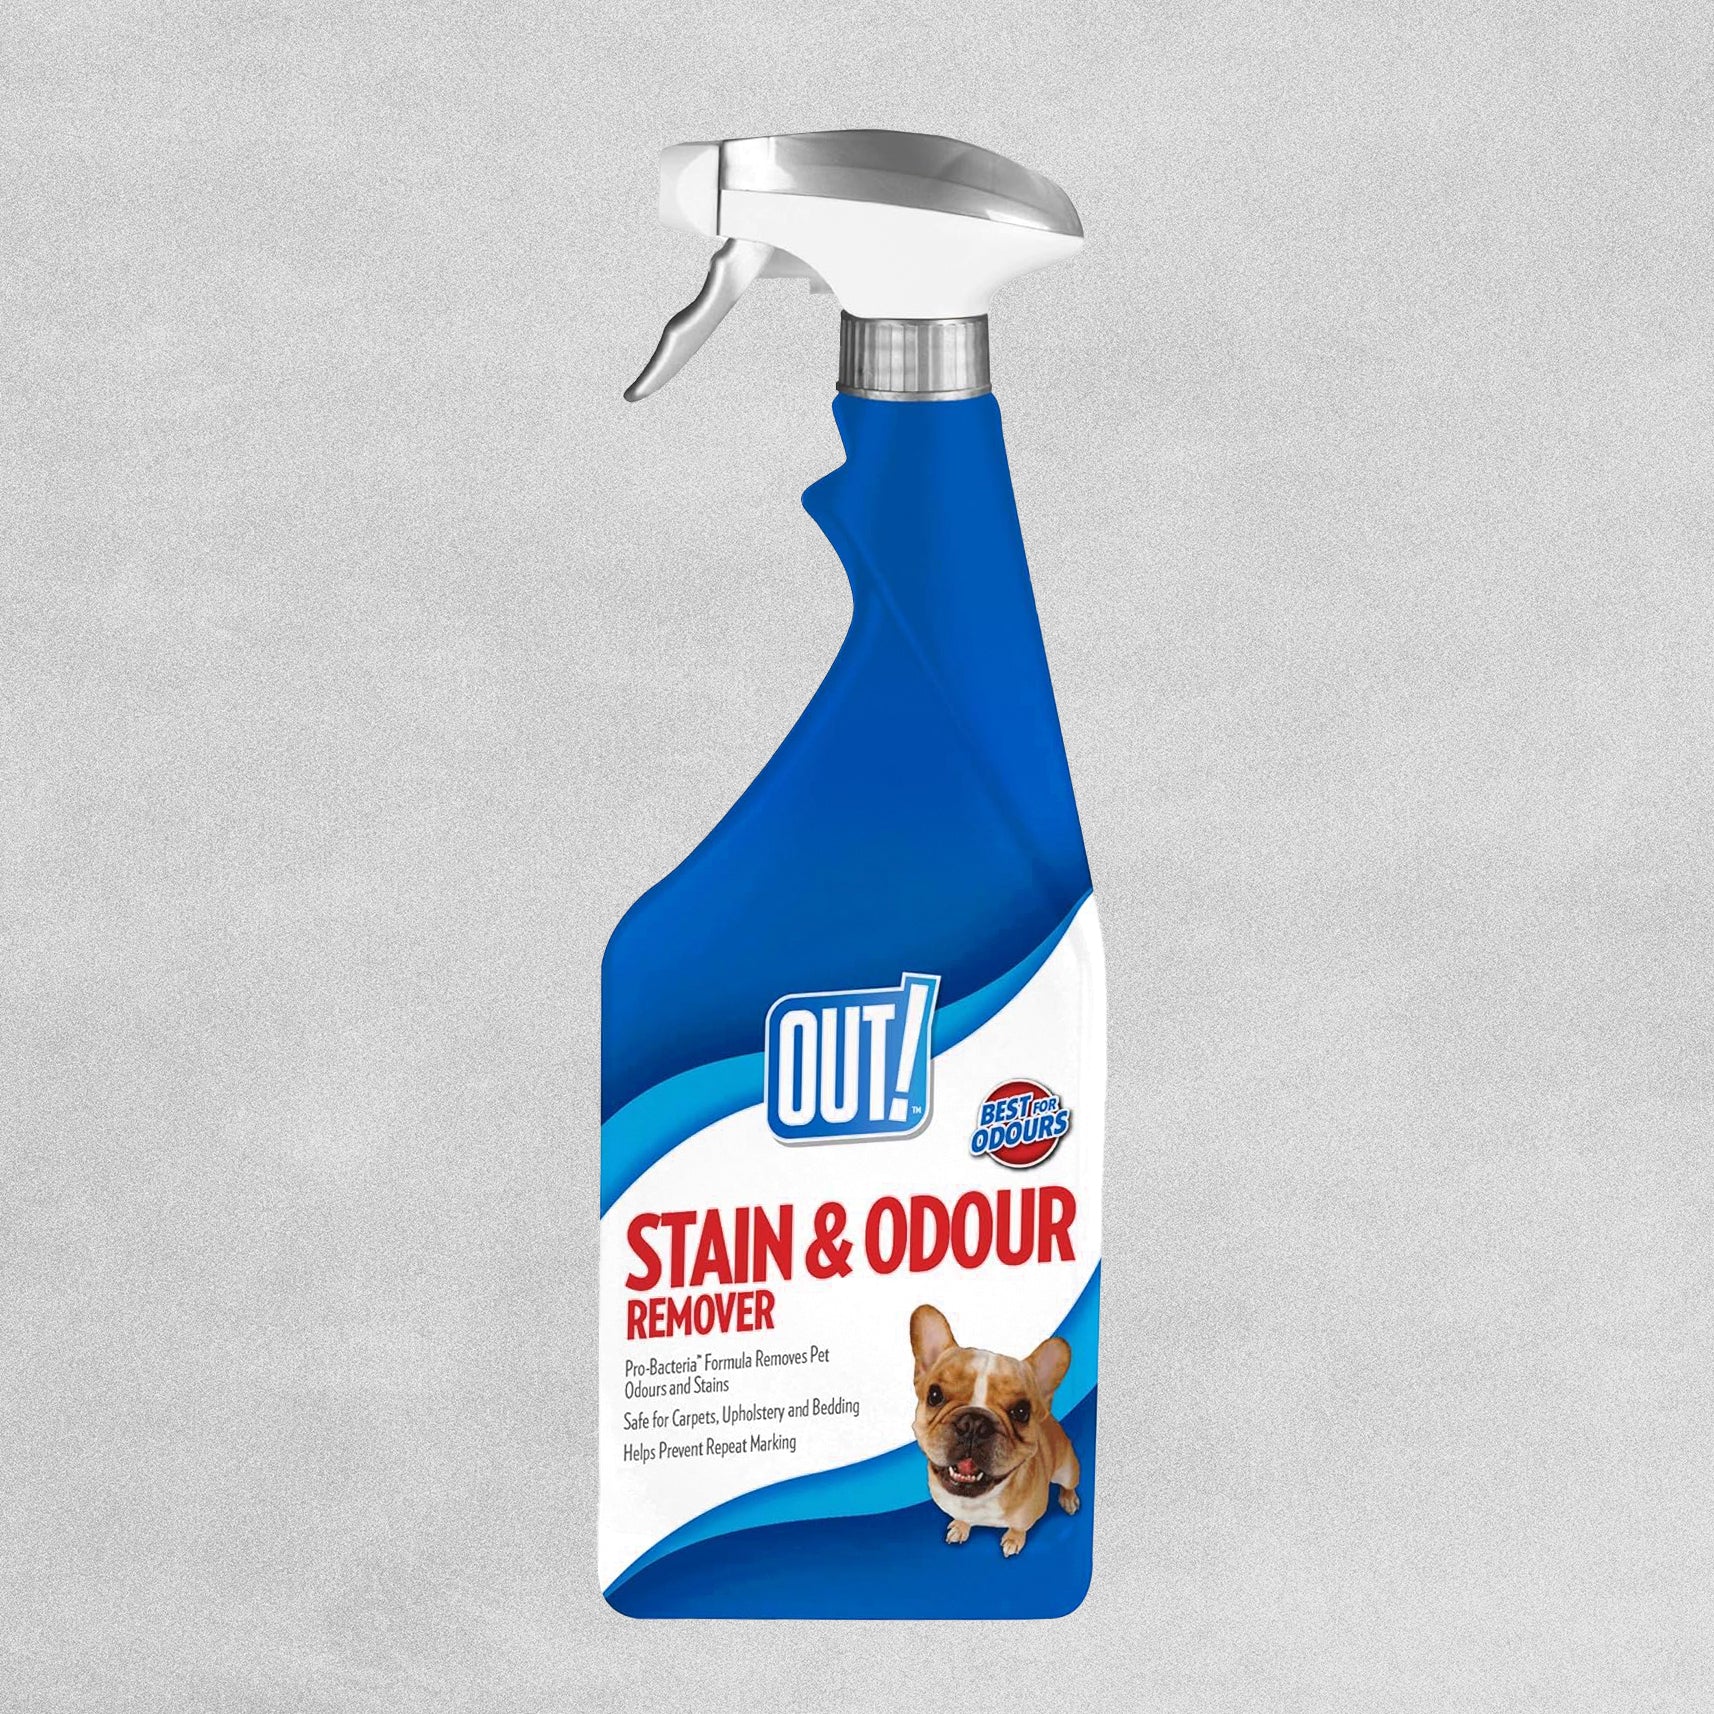 OUT! Petcare Stain and Odour Remover Enzymatic Pro-Bacteria Cleaner 500ml